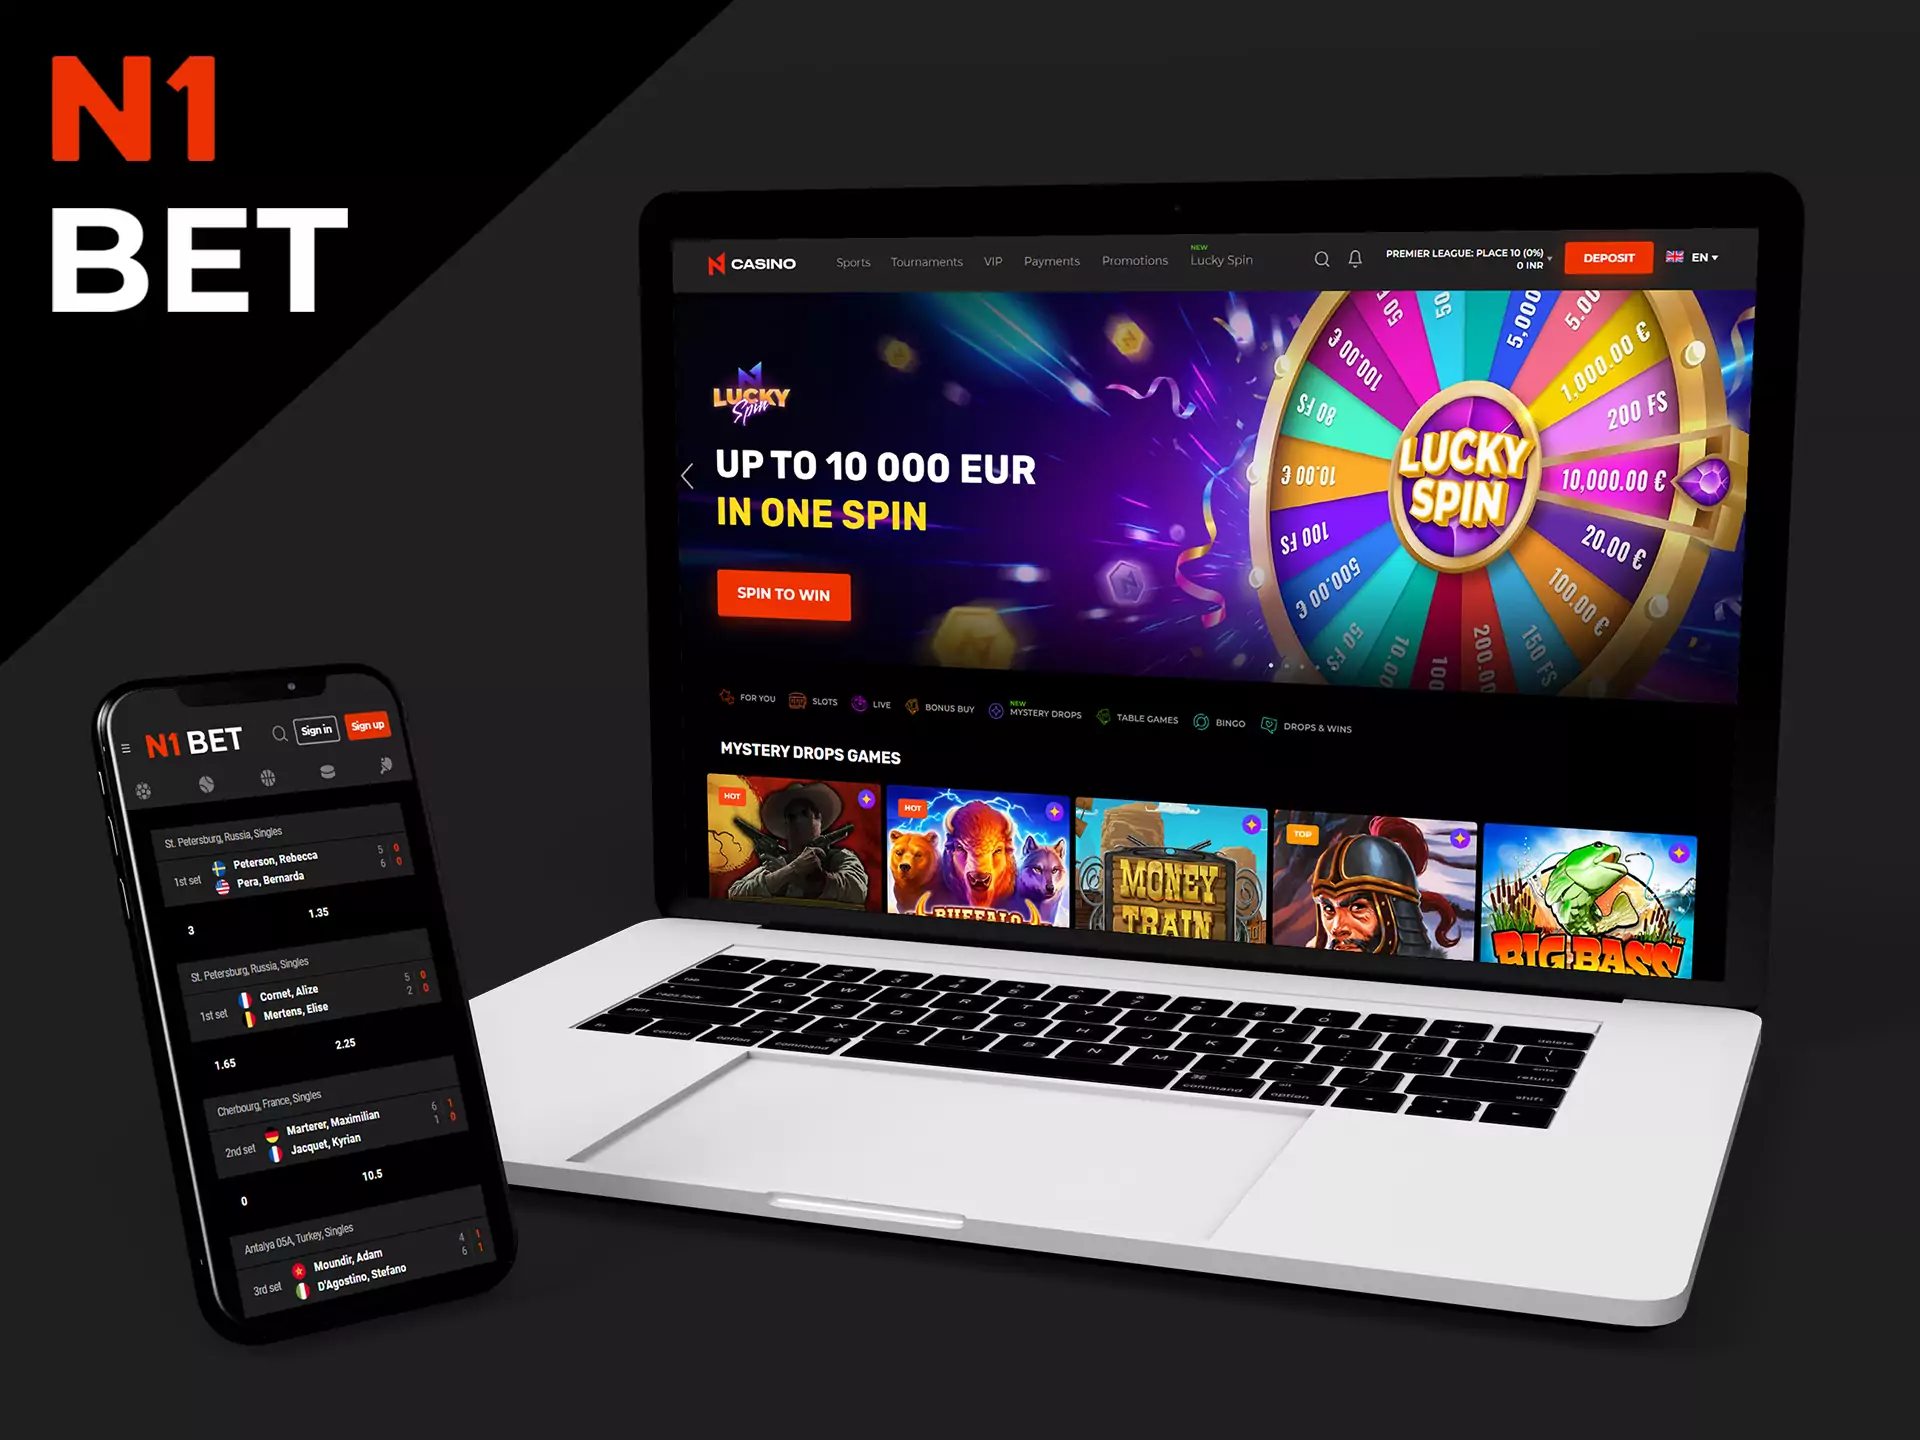 Use mobile version of N1Bet website on any device.